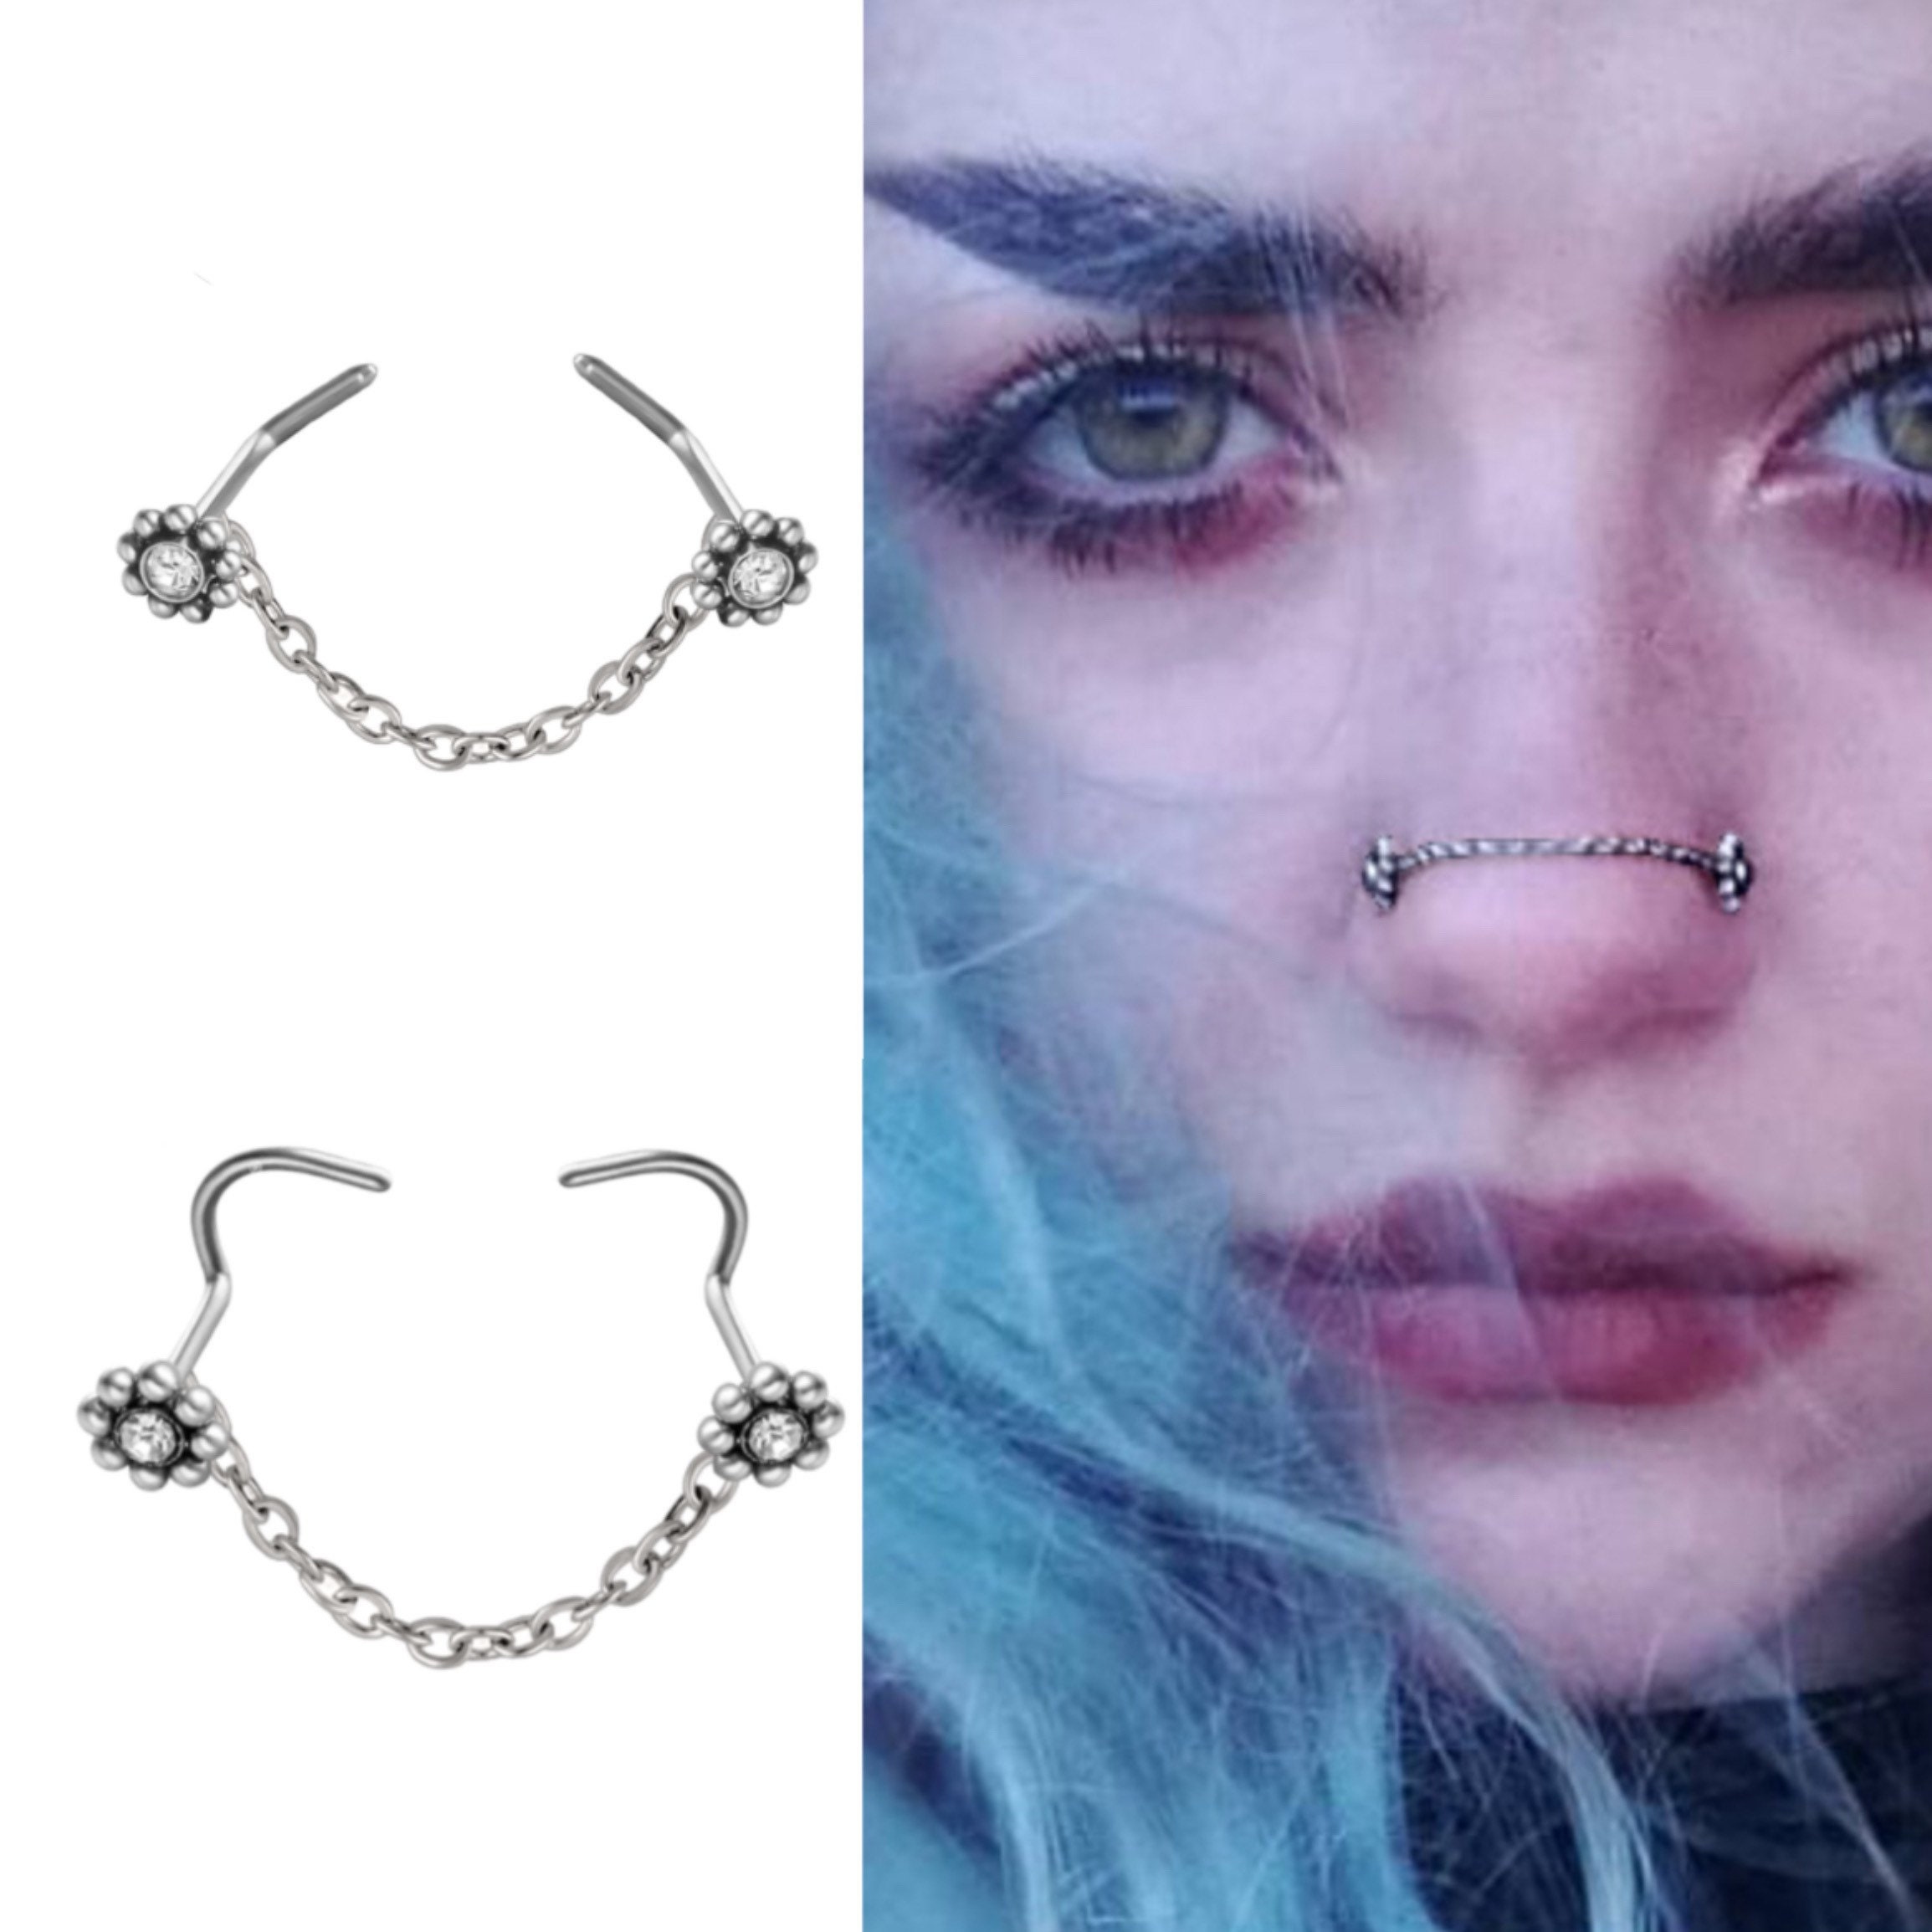 Stainless Steel Nose Chain and Stud Set | Bogo | Piercing Chains| Nostril Chain, Nasalang | Nosechain, Nose Bridge | Alternative Jewelry